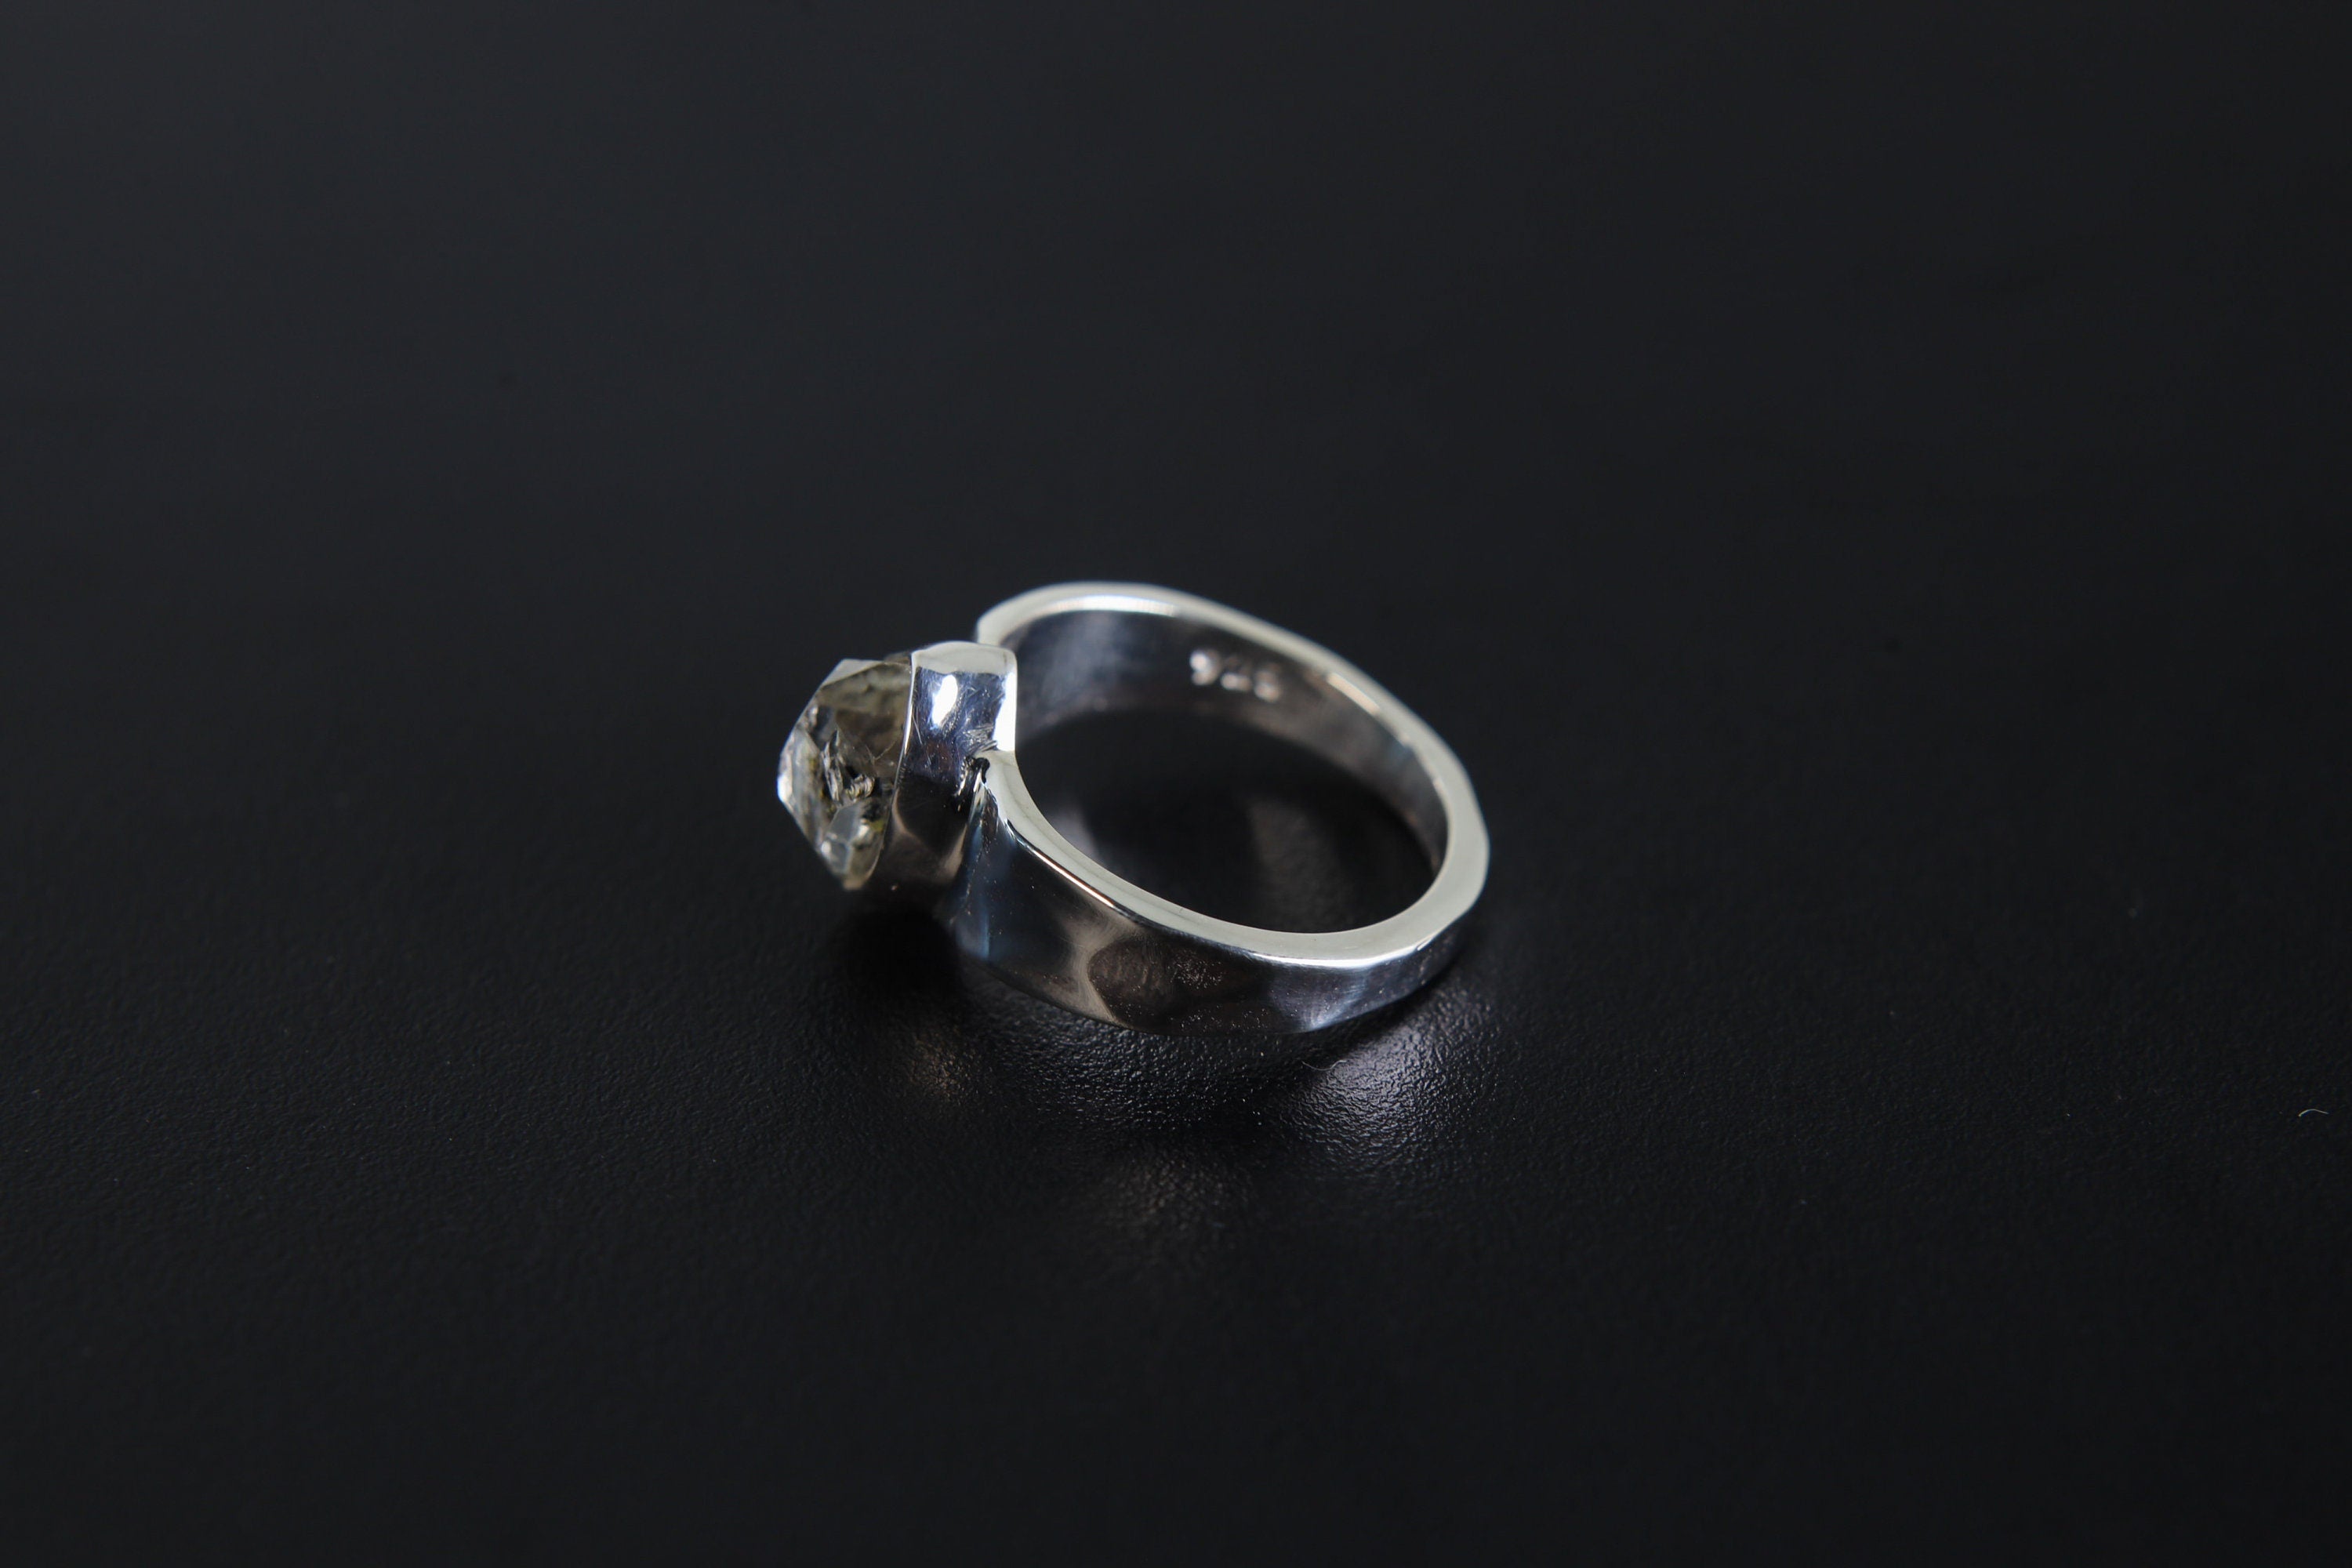 Double Terminated Herkimer Diamond - Unisex - Hammered Band - 925 Sterling Silver Ring - High Shine Polish - Promotes Spiritual Growth